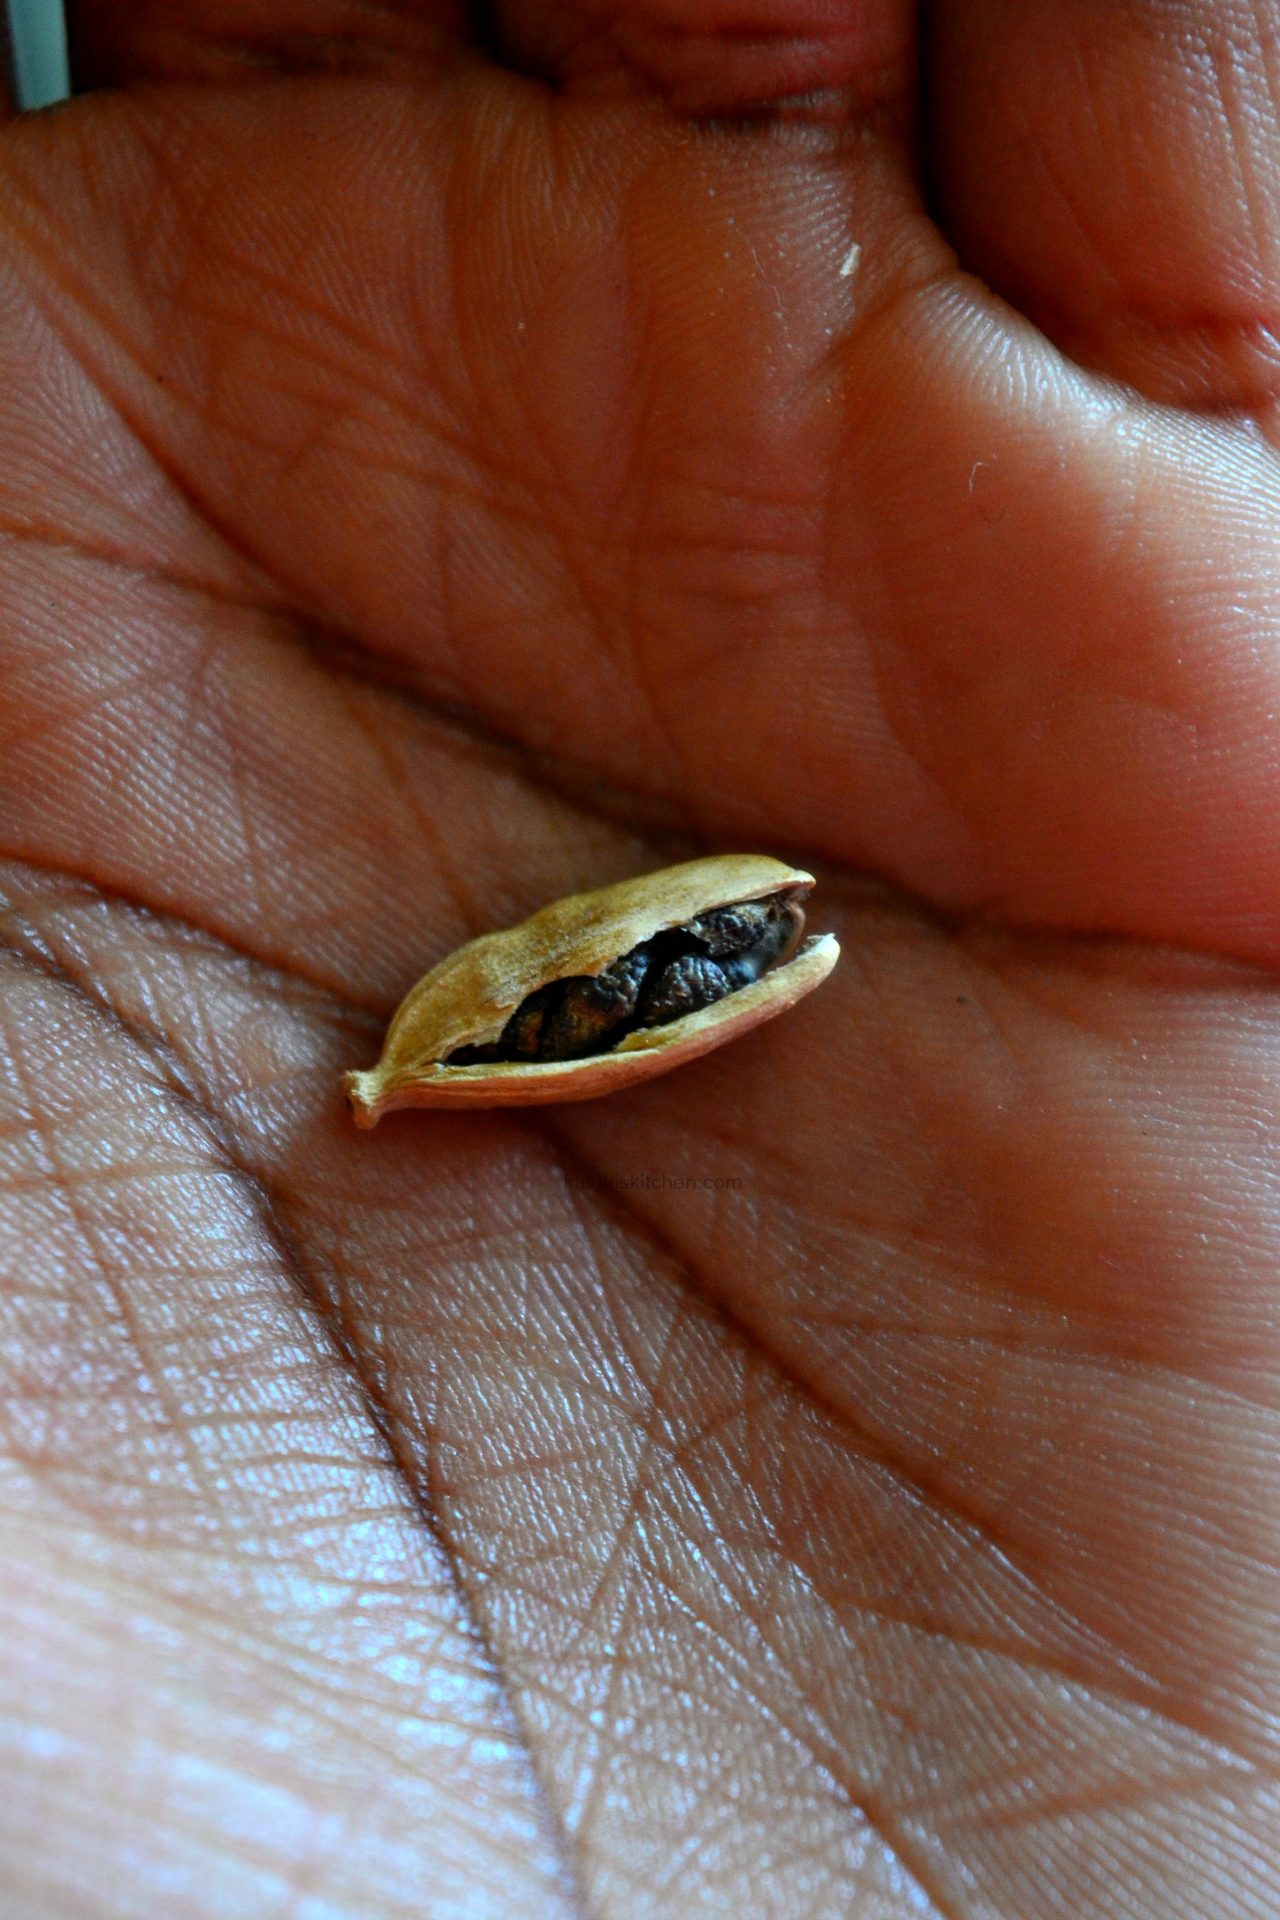 crush the hust of the cardamom pod open, extract the dark seeds inside and crush them until they pulverize_cardamom_how to cook with cardamom